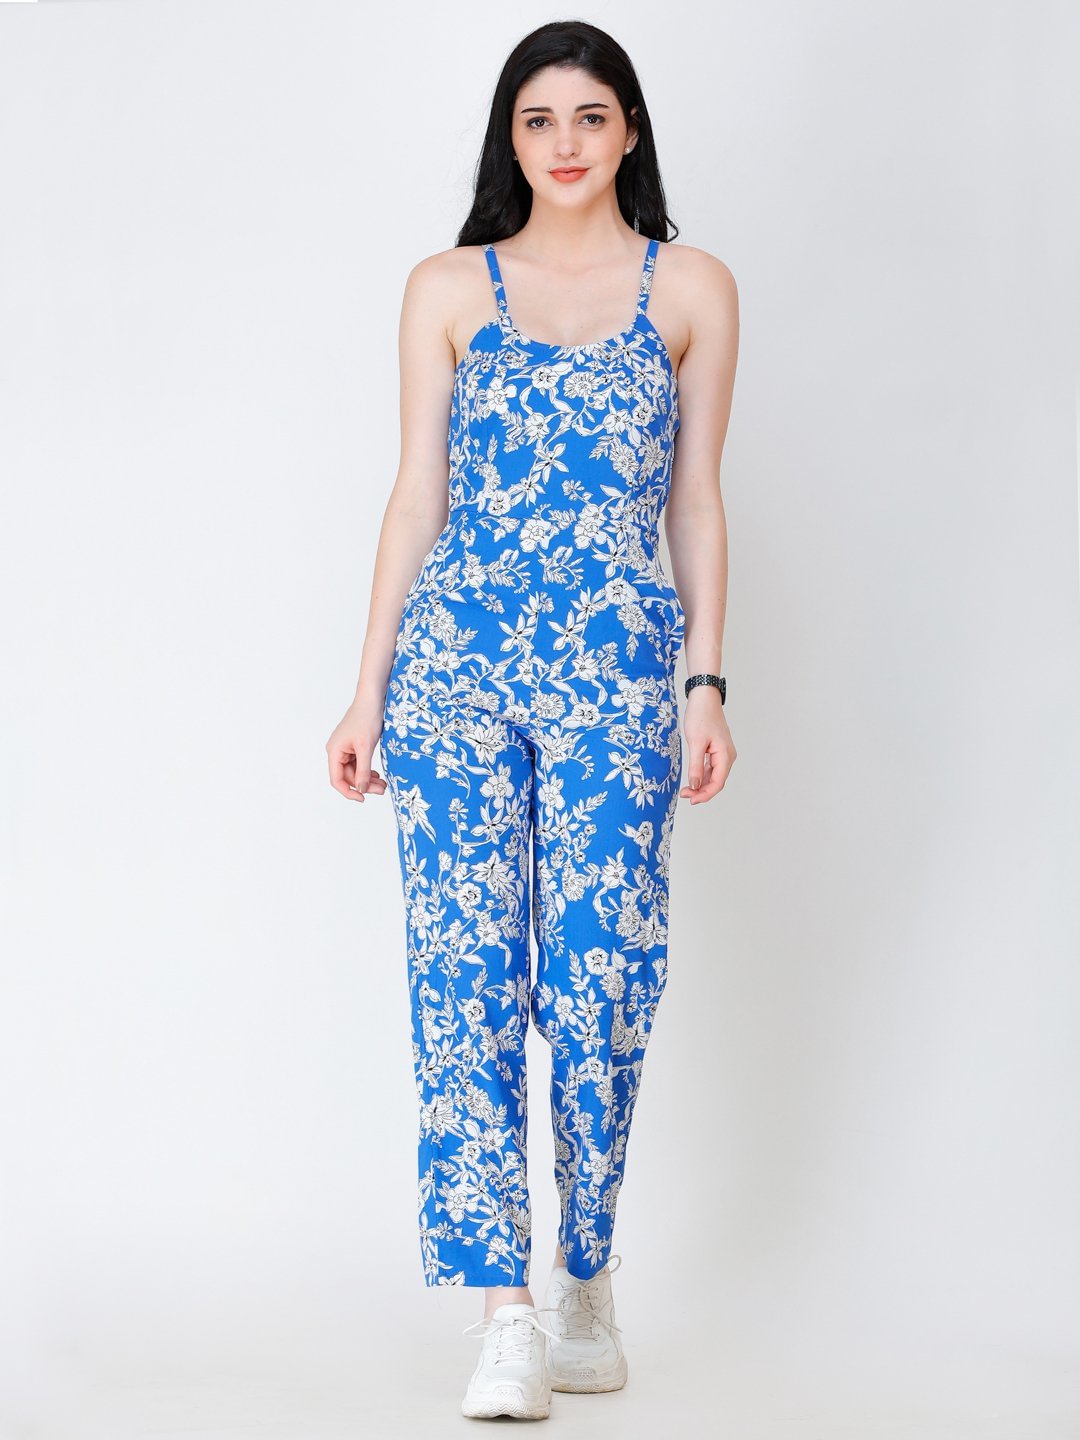 SCORPIUS BLUE AND WHITE PRINTED JUMPSUIT